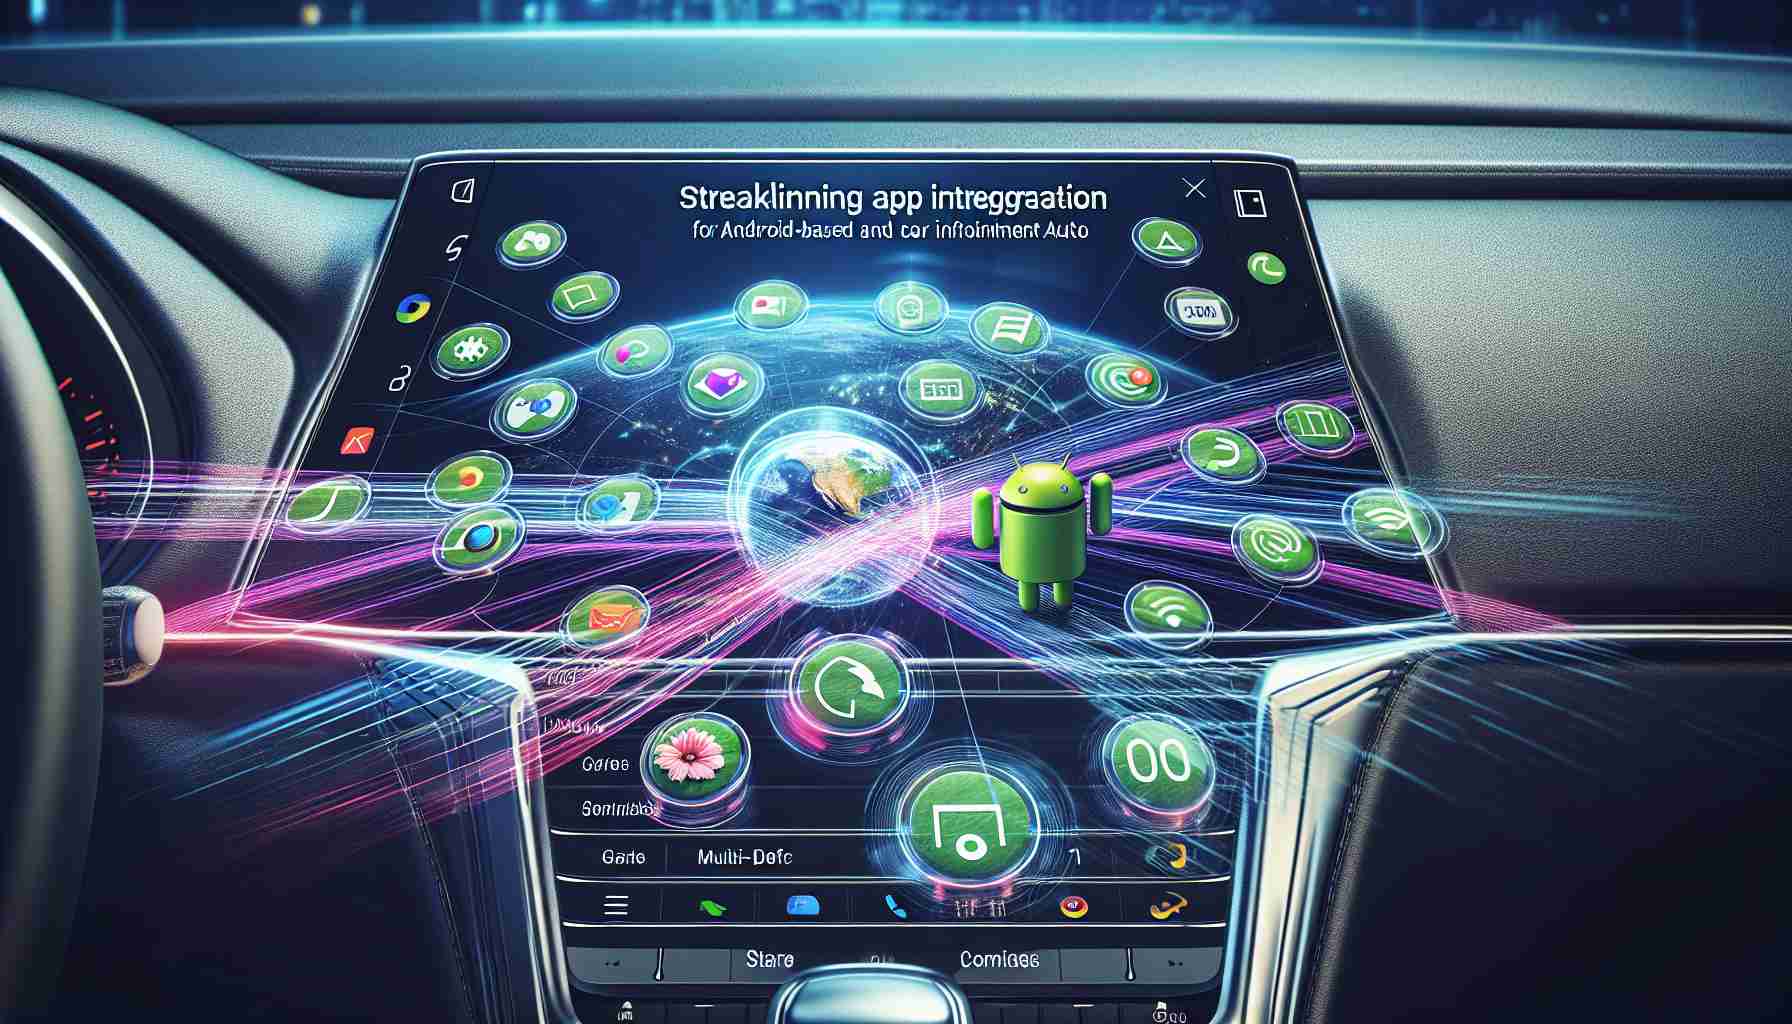 Google Streamlines App Integration for Android Auto and Car Infotainment Systems